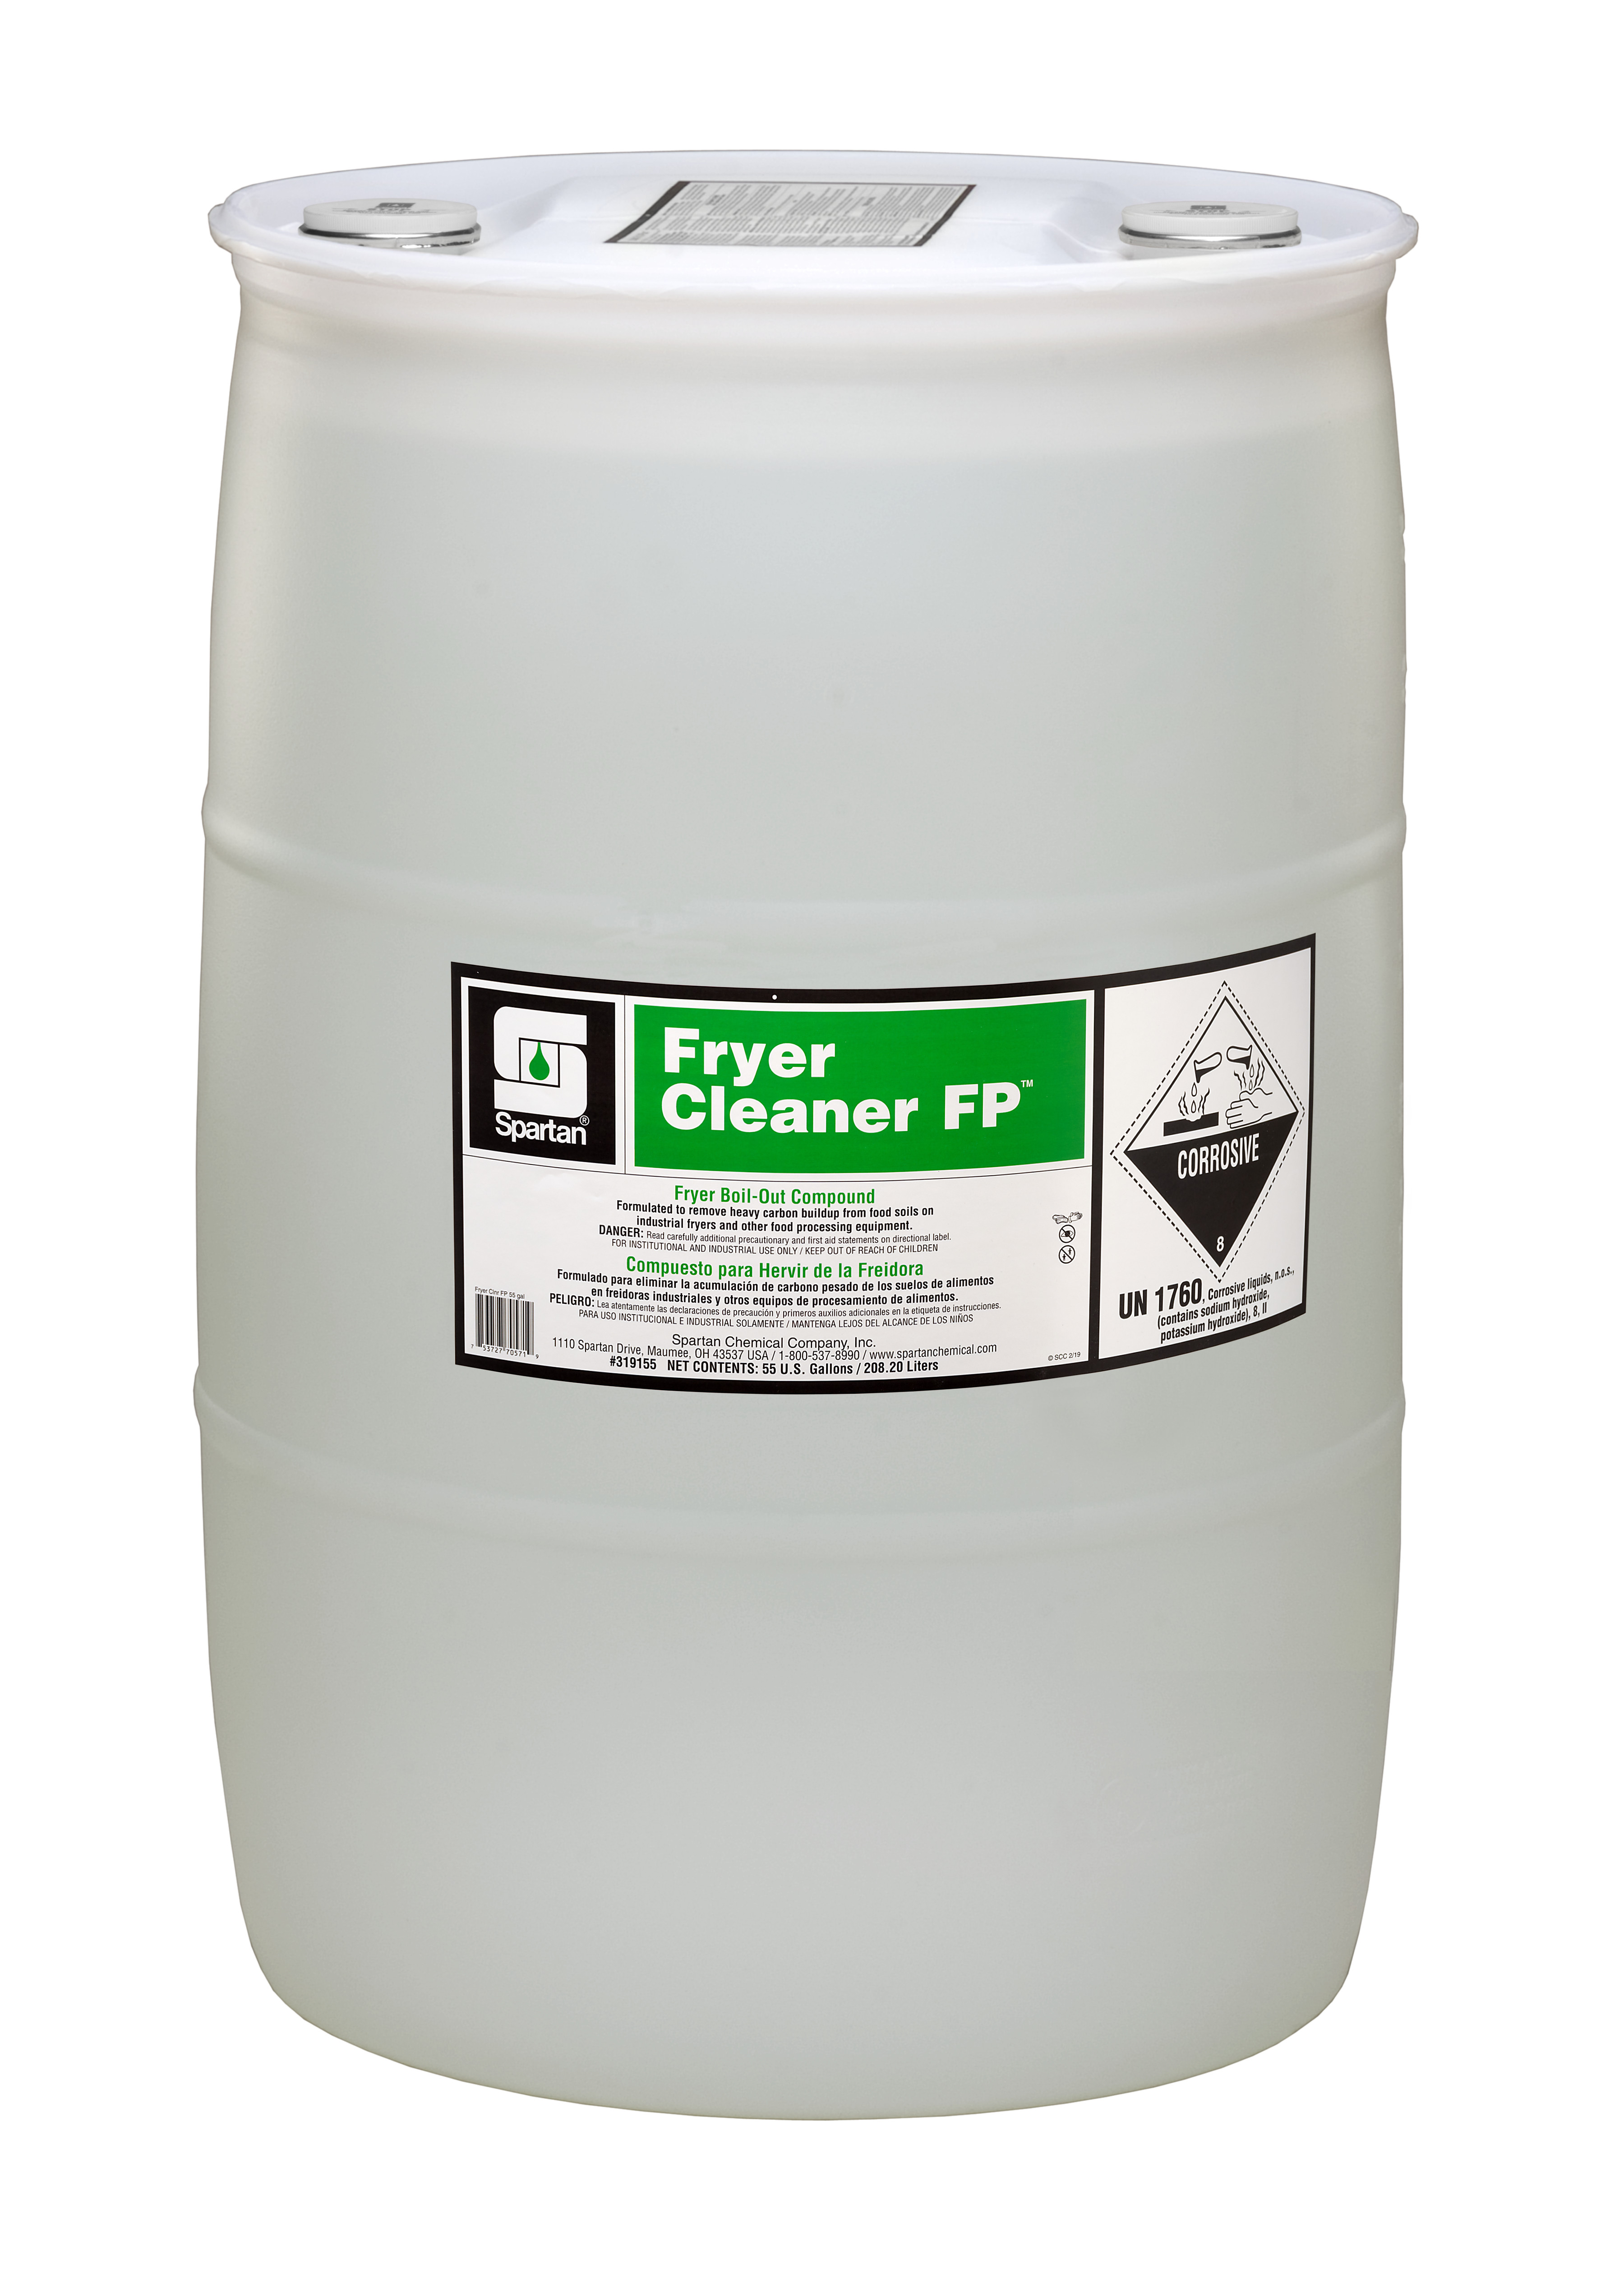 Spartan Chemical Company Fryer Cleaner FP, 55 GAL DRUM